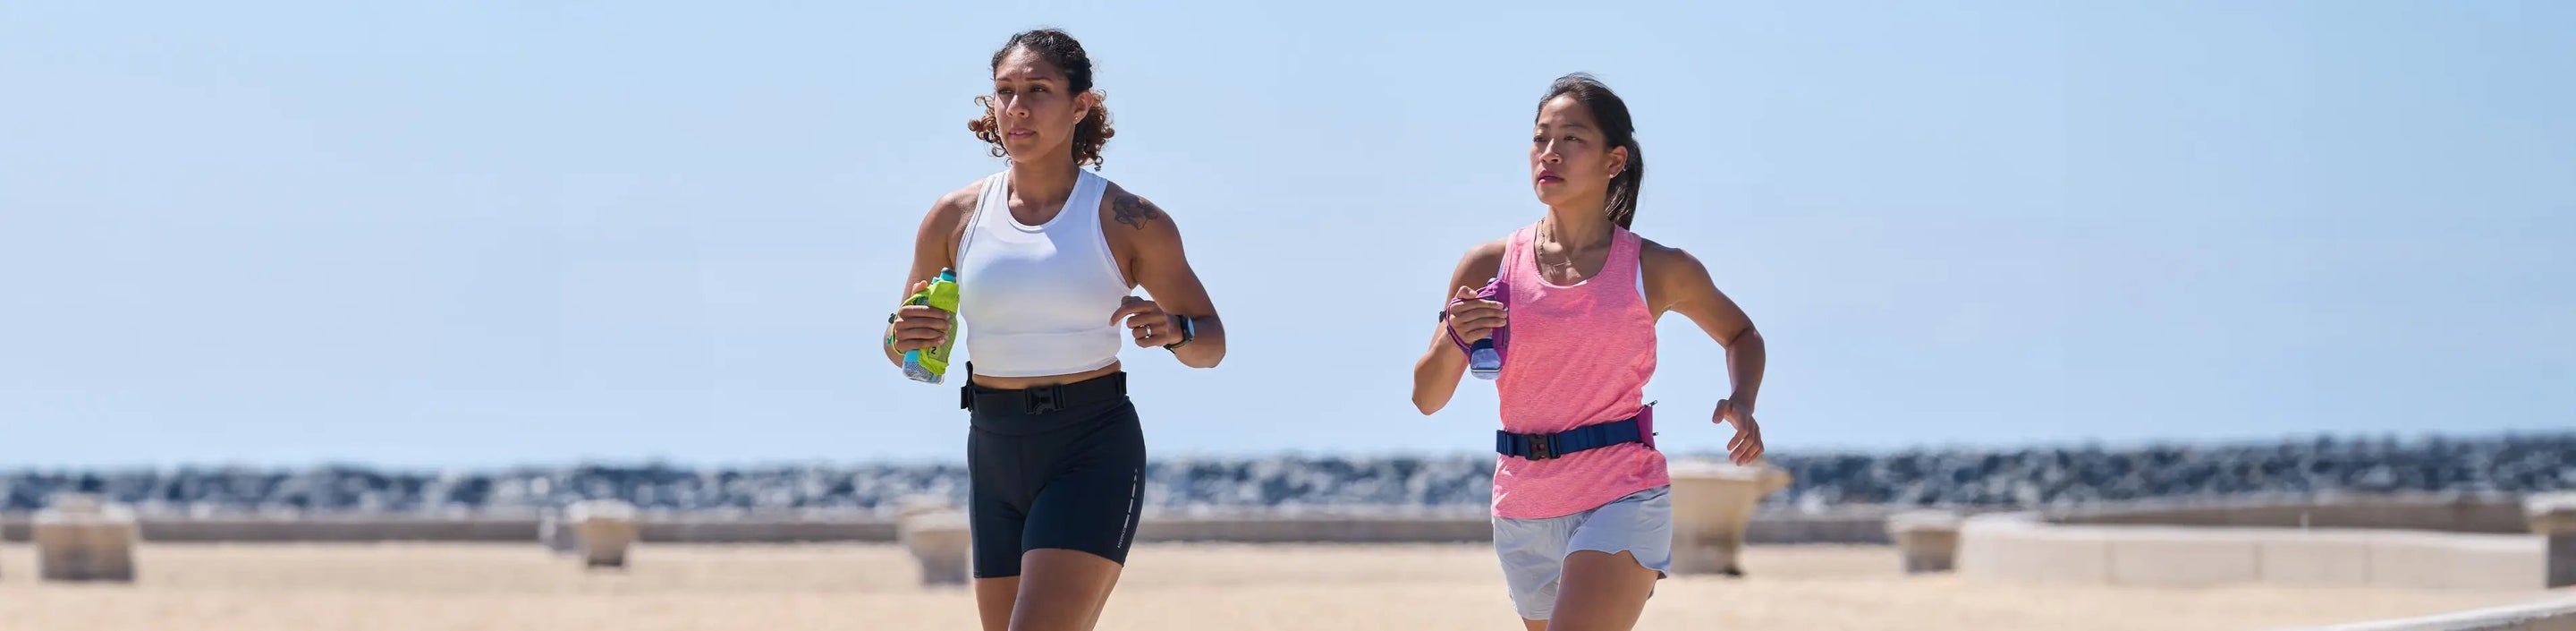 two women running at the beach while wearing Nathan Sports tank tops in white and pink